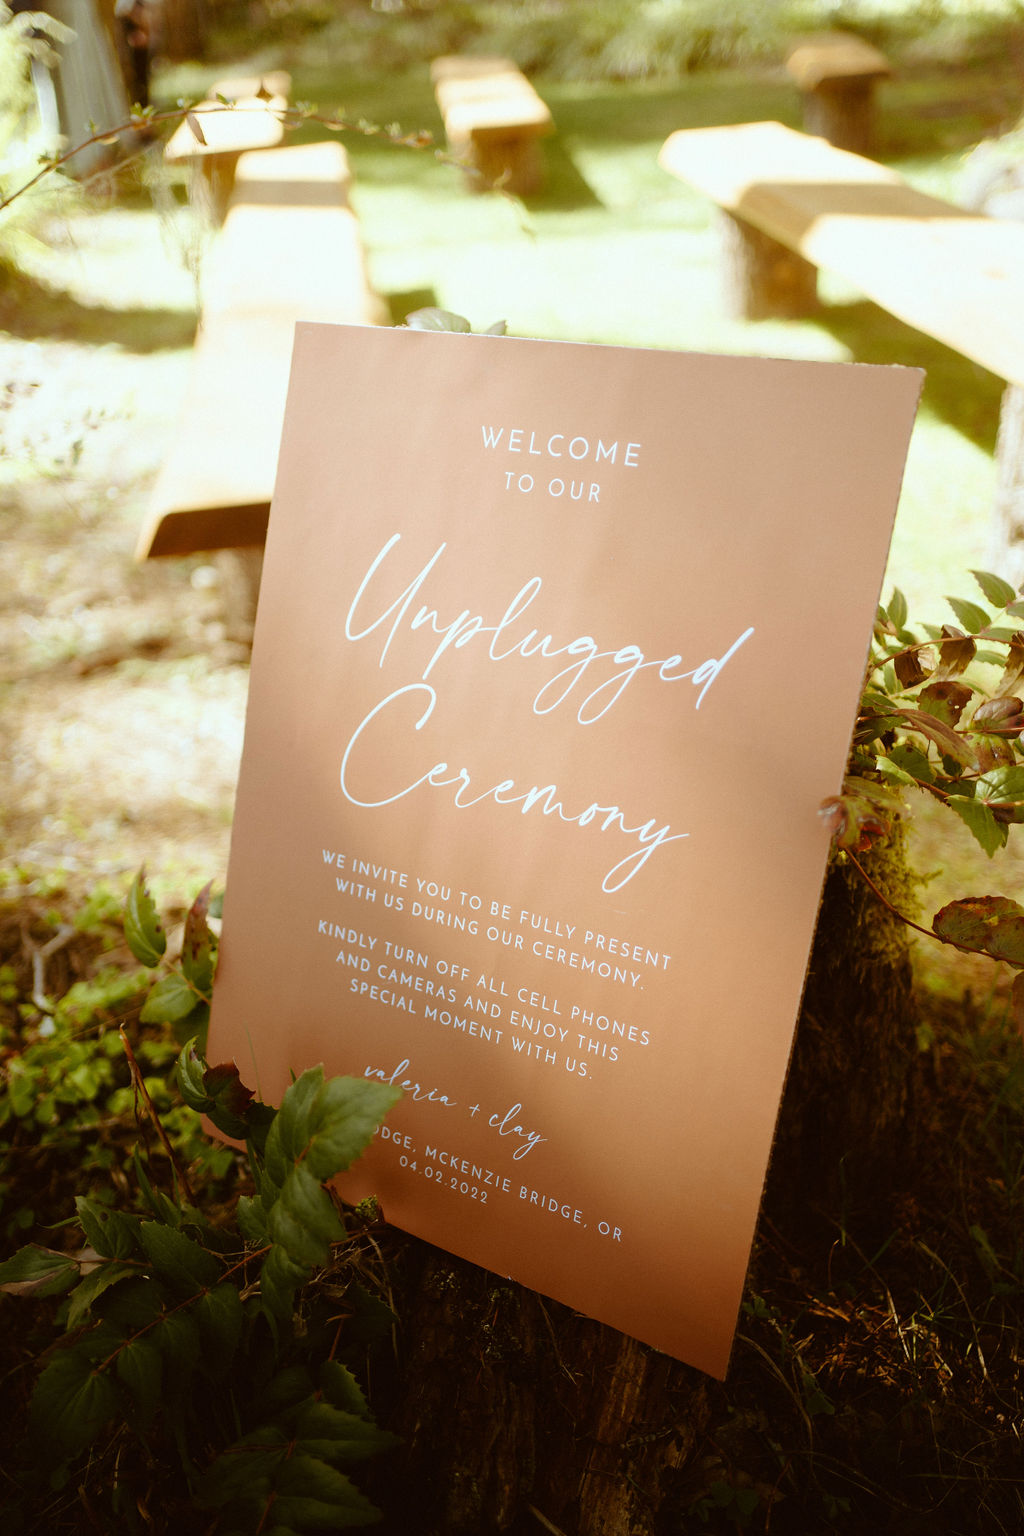 Welcome sign to the wedding were the bride and groom are asking to have an unplugged ceremony.